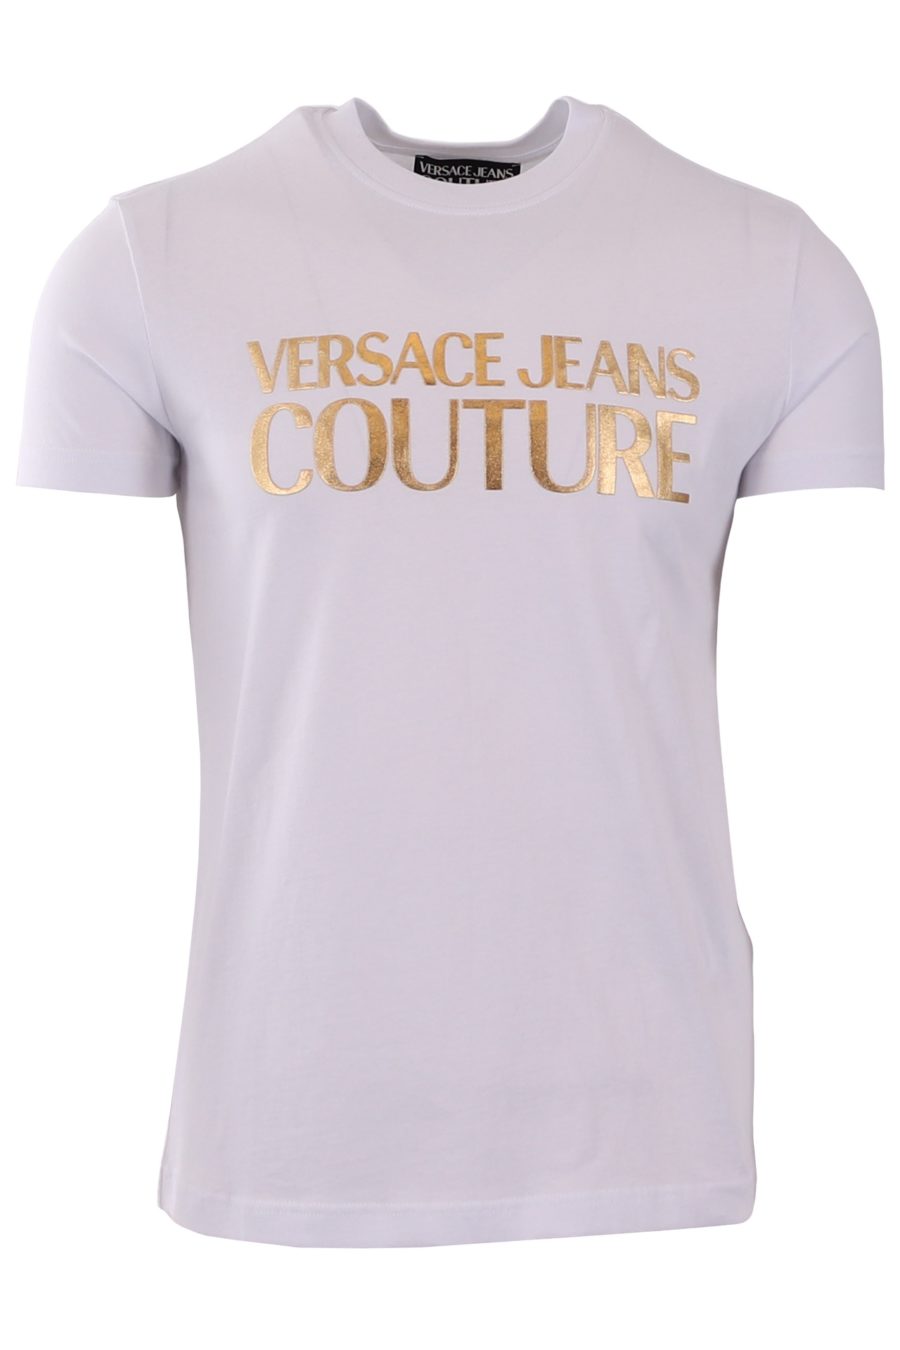 Versace Jeans Couture T-shirt white with gold written logo - bc197a7c81b2d23c15ff68151c92471cfa990165